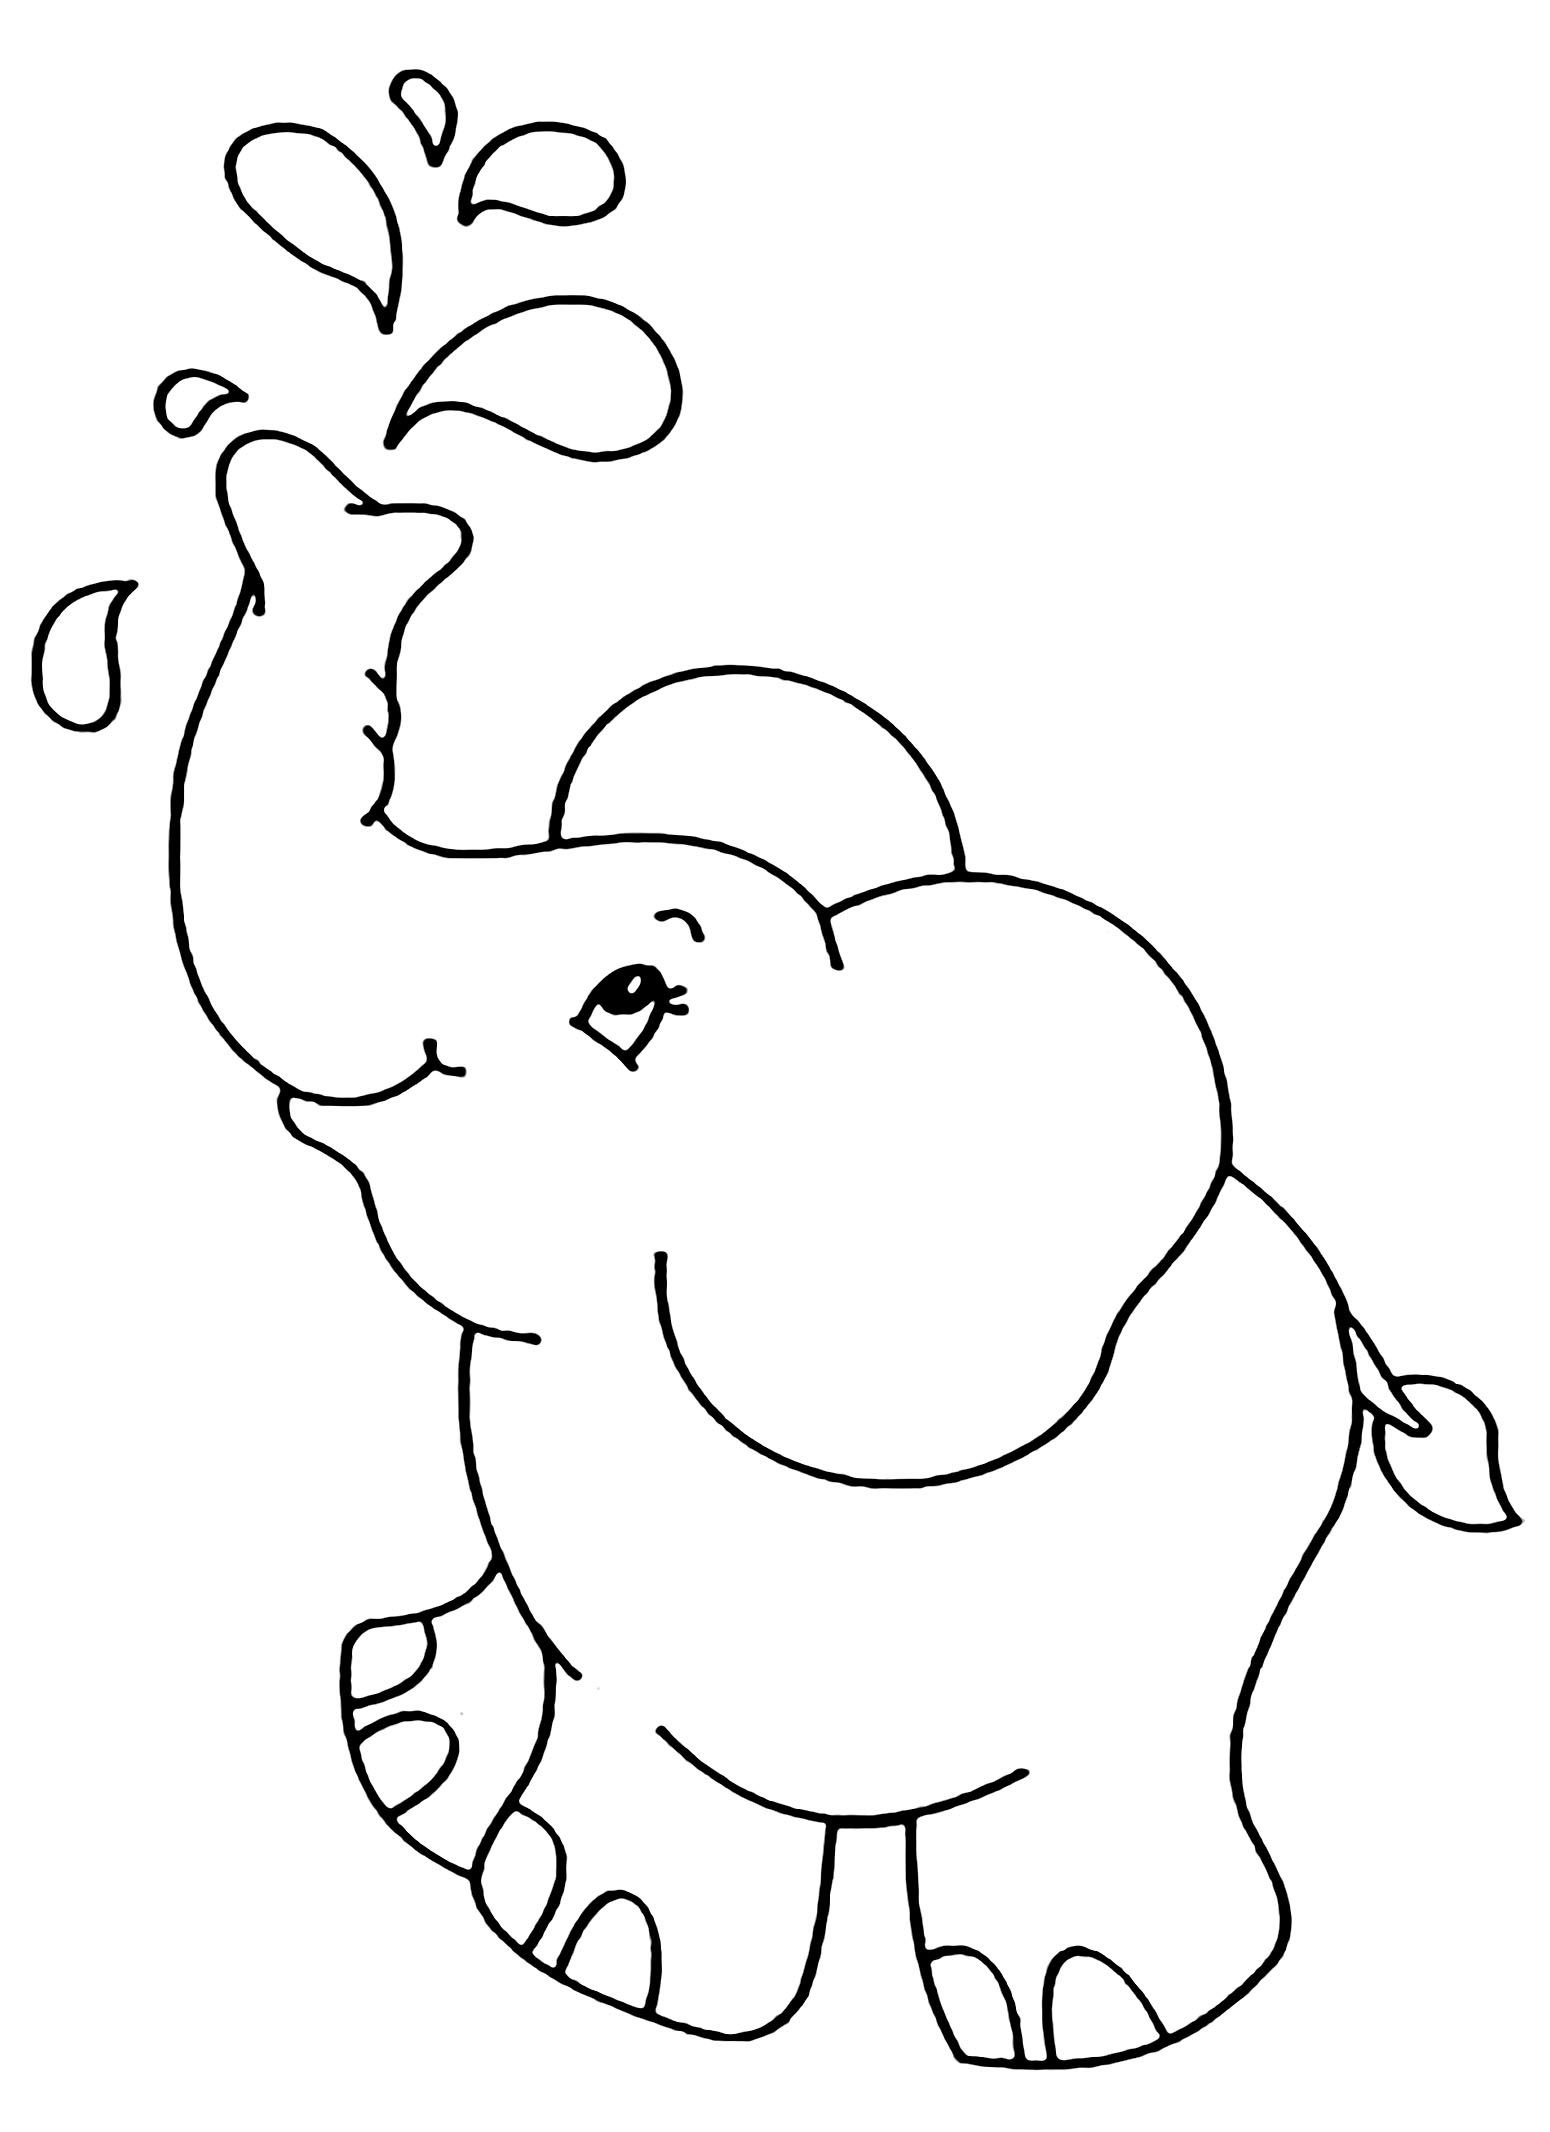 Elephants free to color for kids - Elephants Kids Coloring Pages